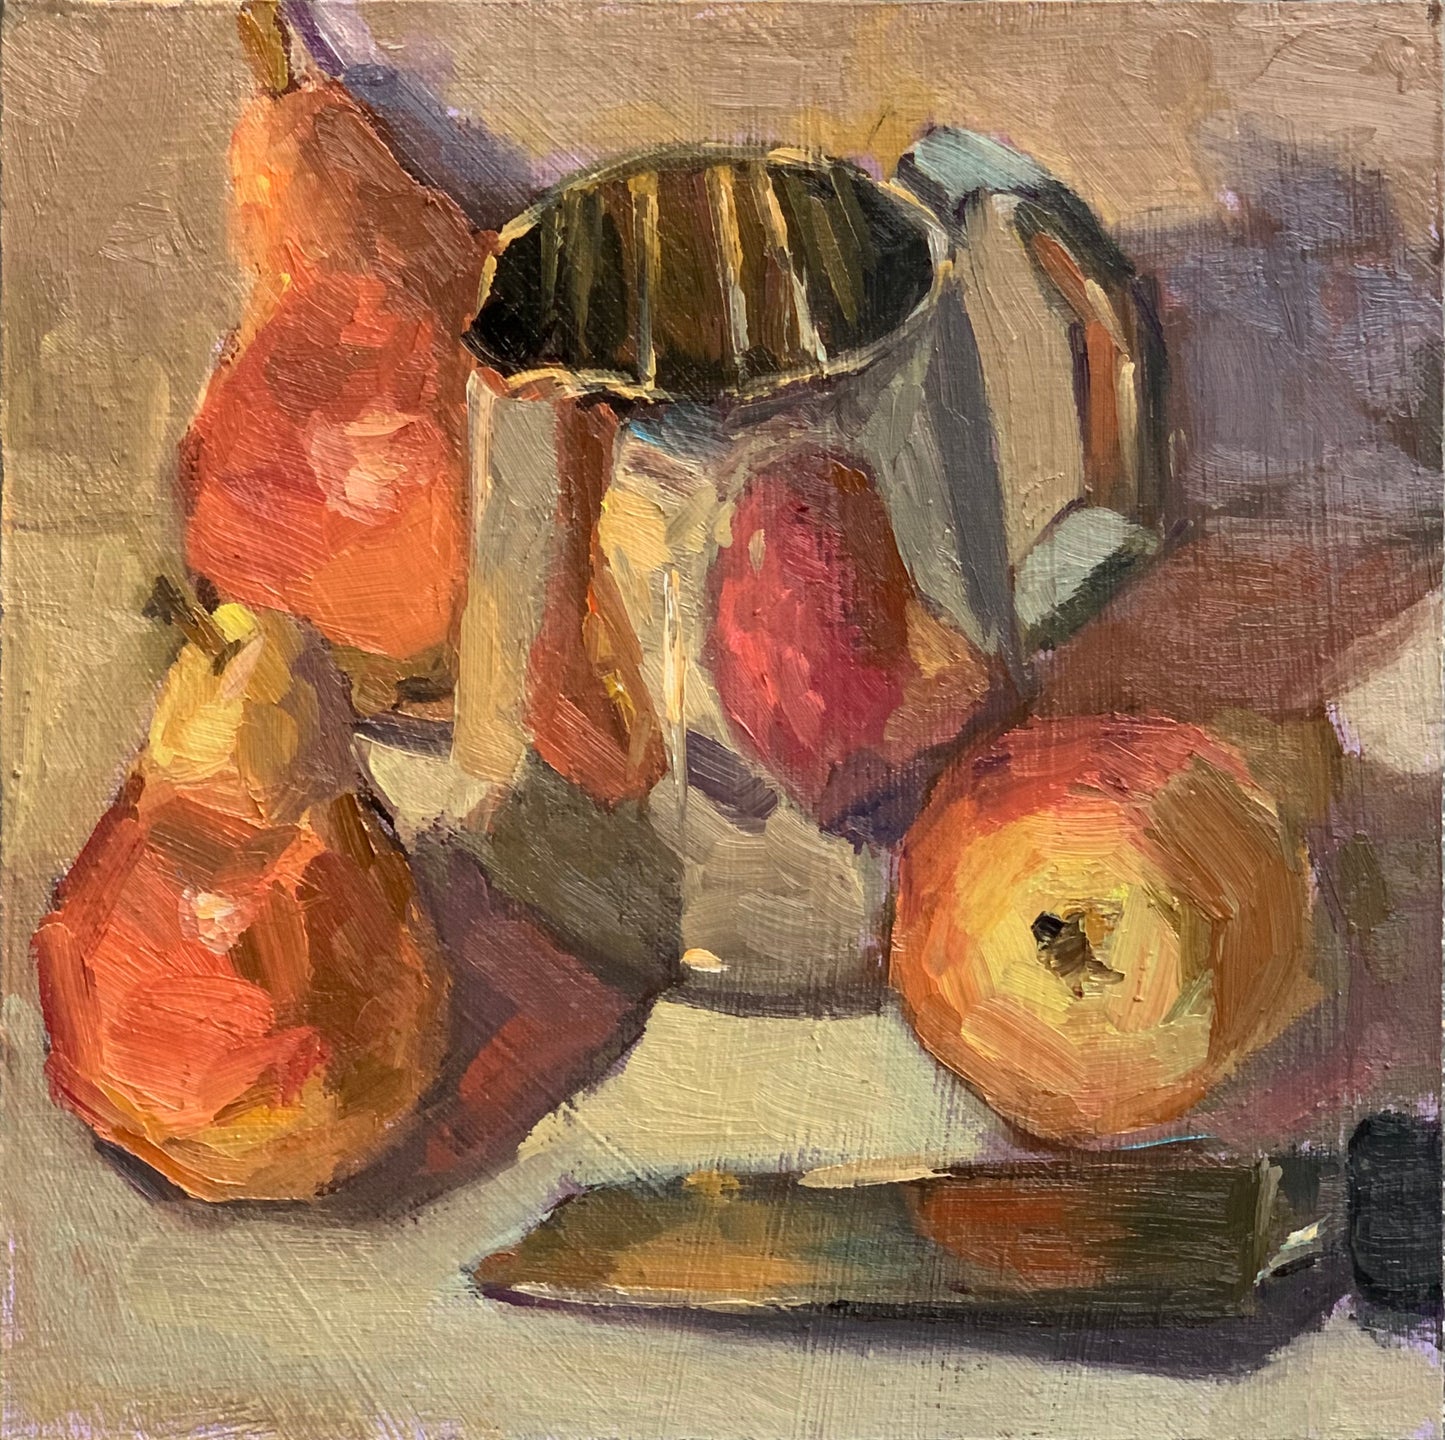 Original Oil Painting - Red Pears and Silver